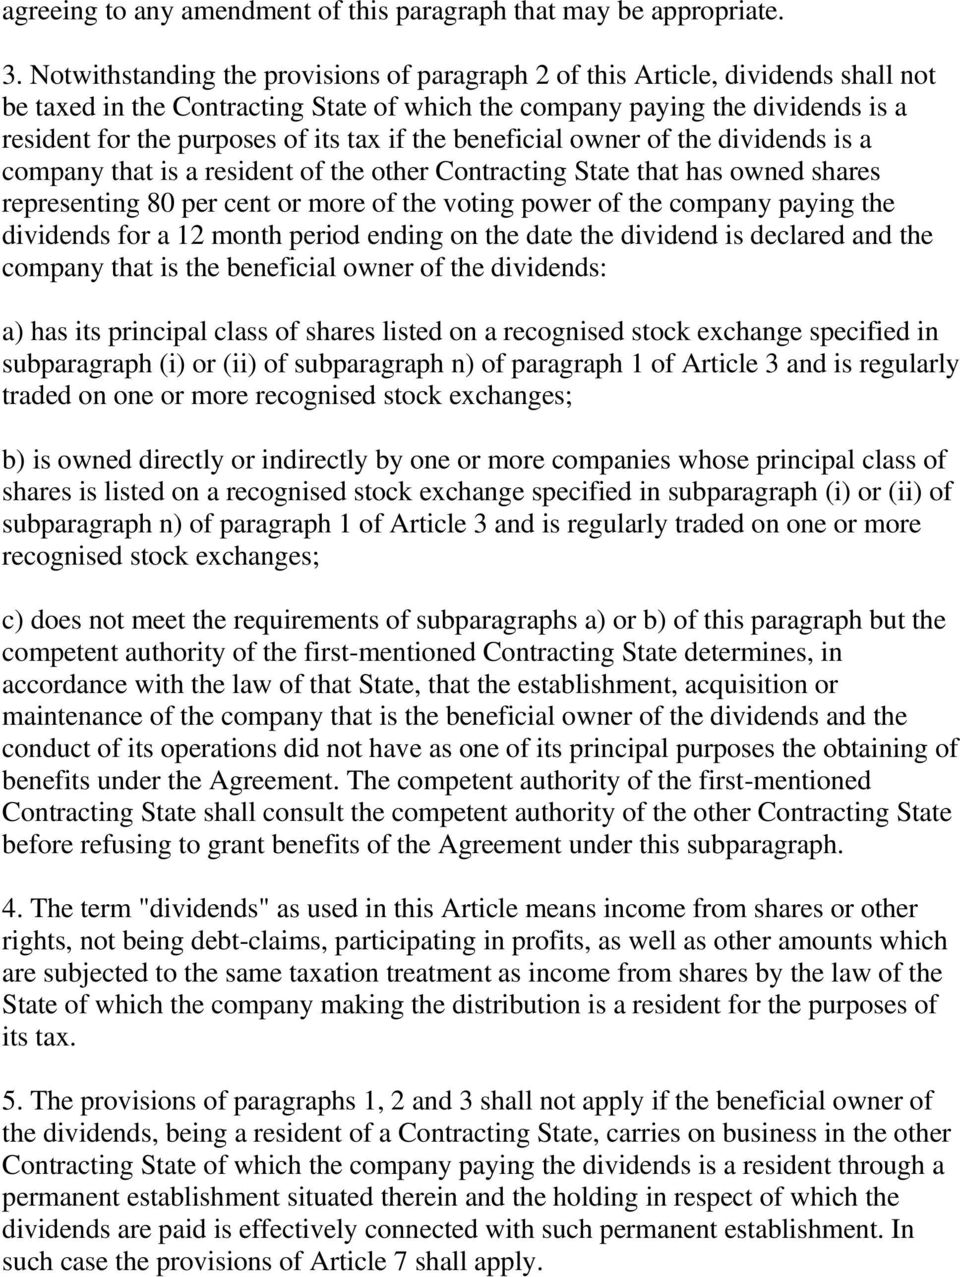 tax if the beneficial owner of the dividends is a company that is a resident of the other Contracting State that has owned shares representing 80 per cent or more of the voting power of the company